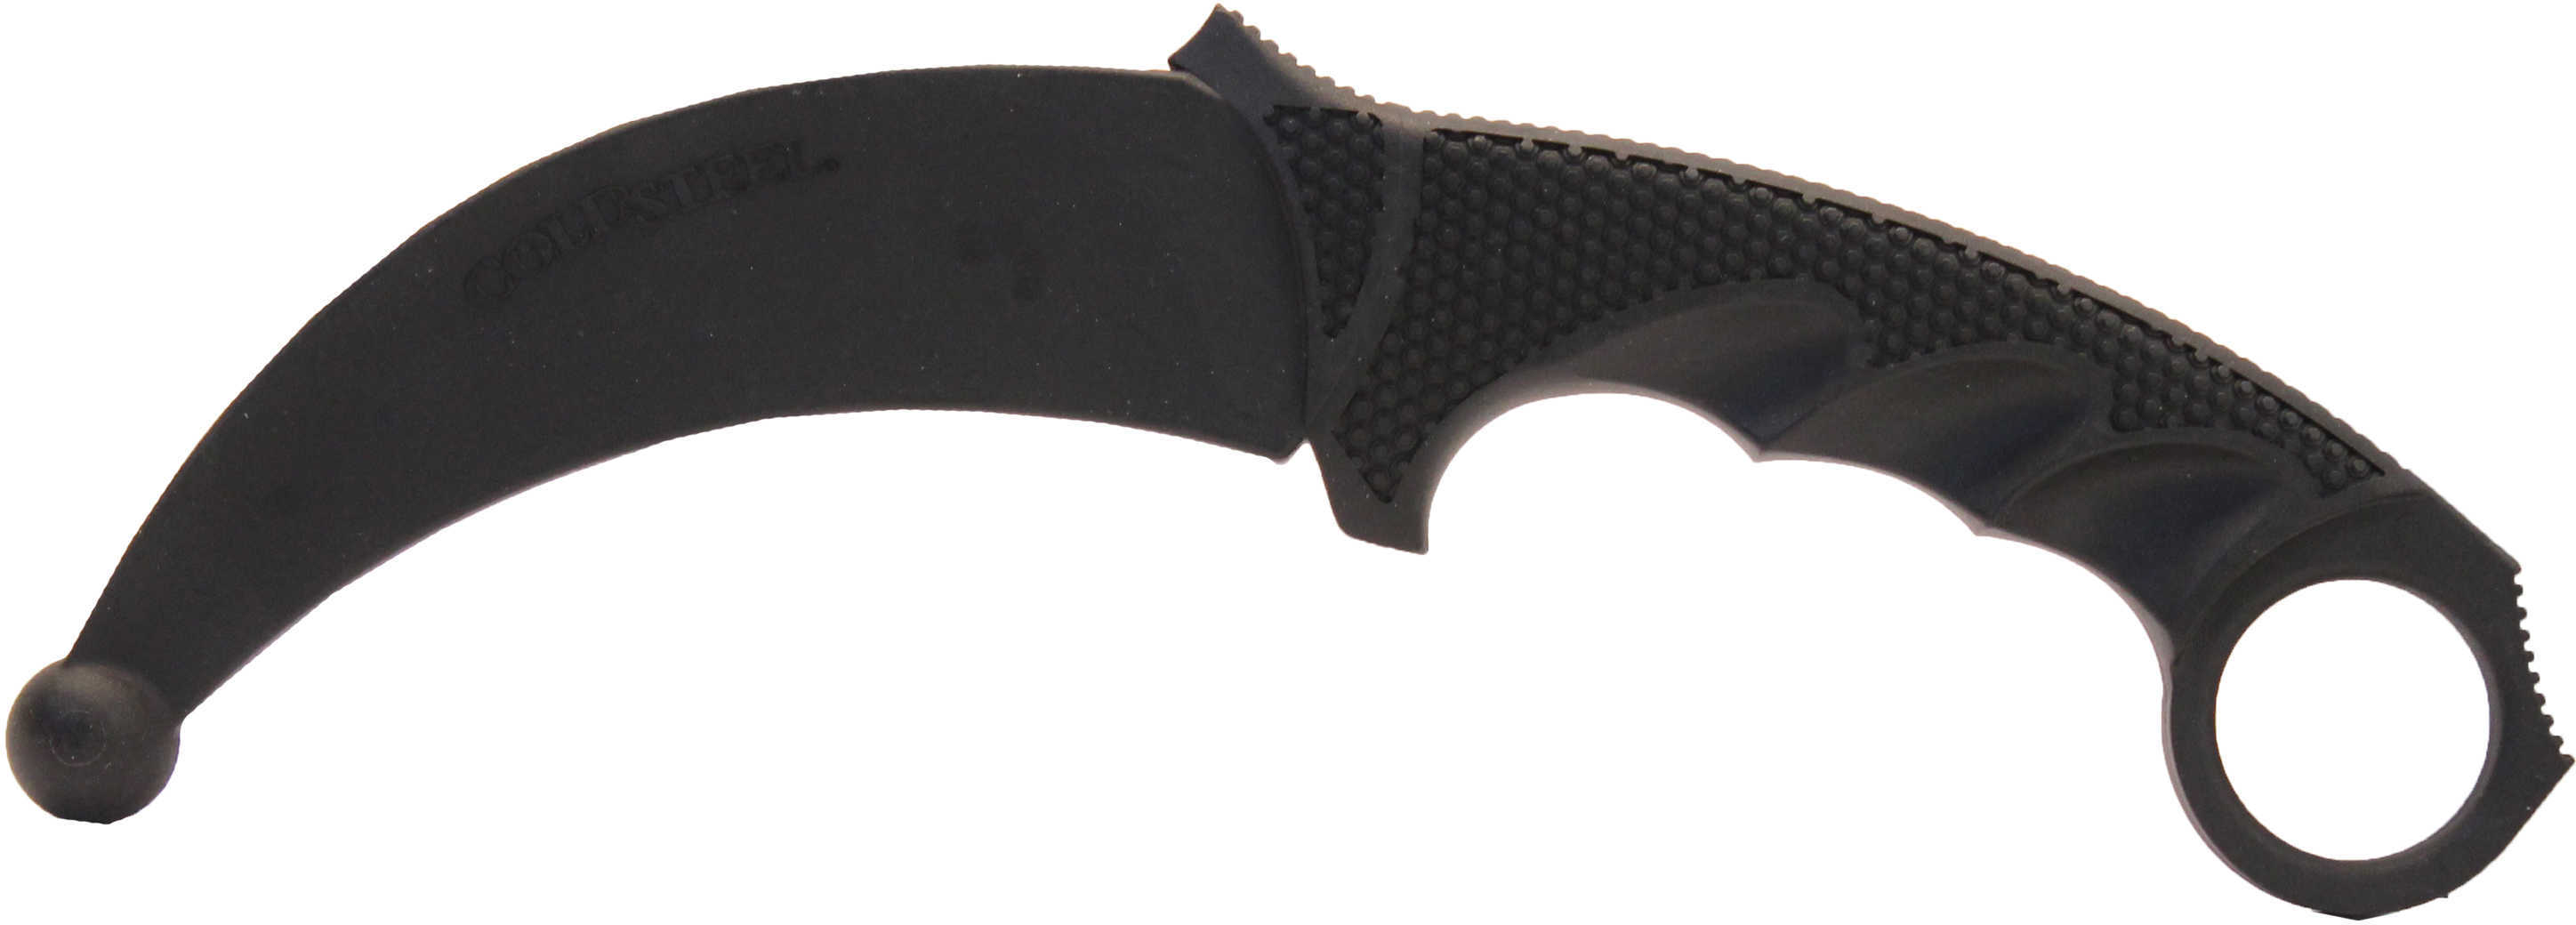 Cold Steel Rubber Training Karambit, Boxed